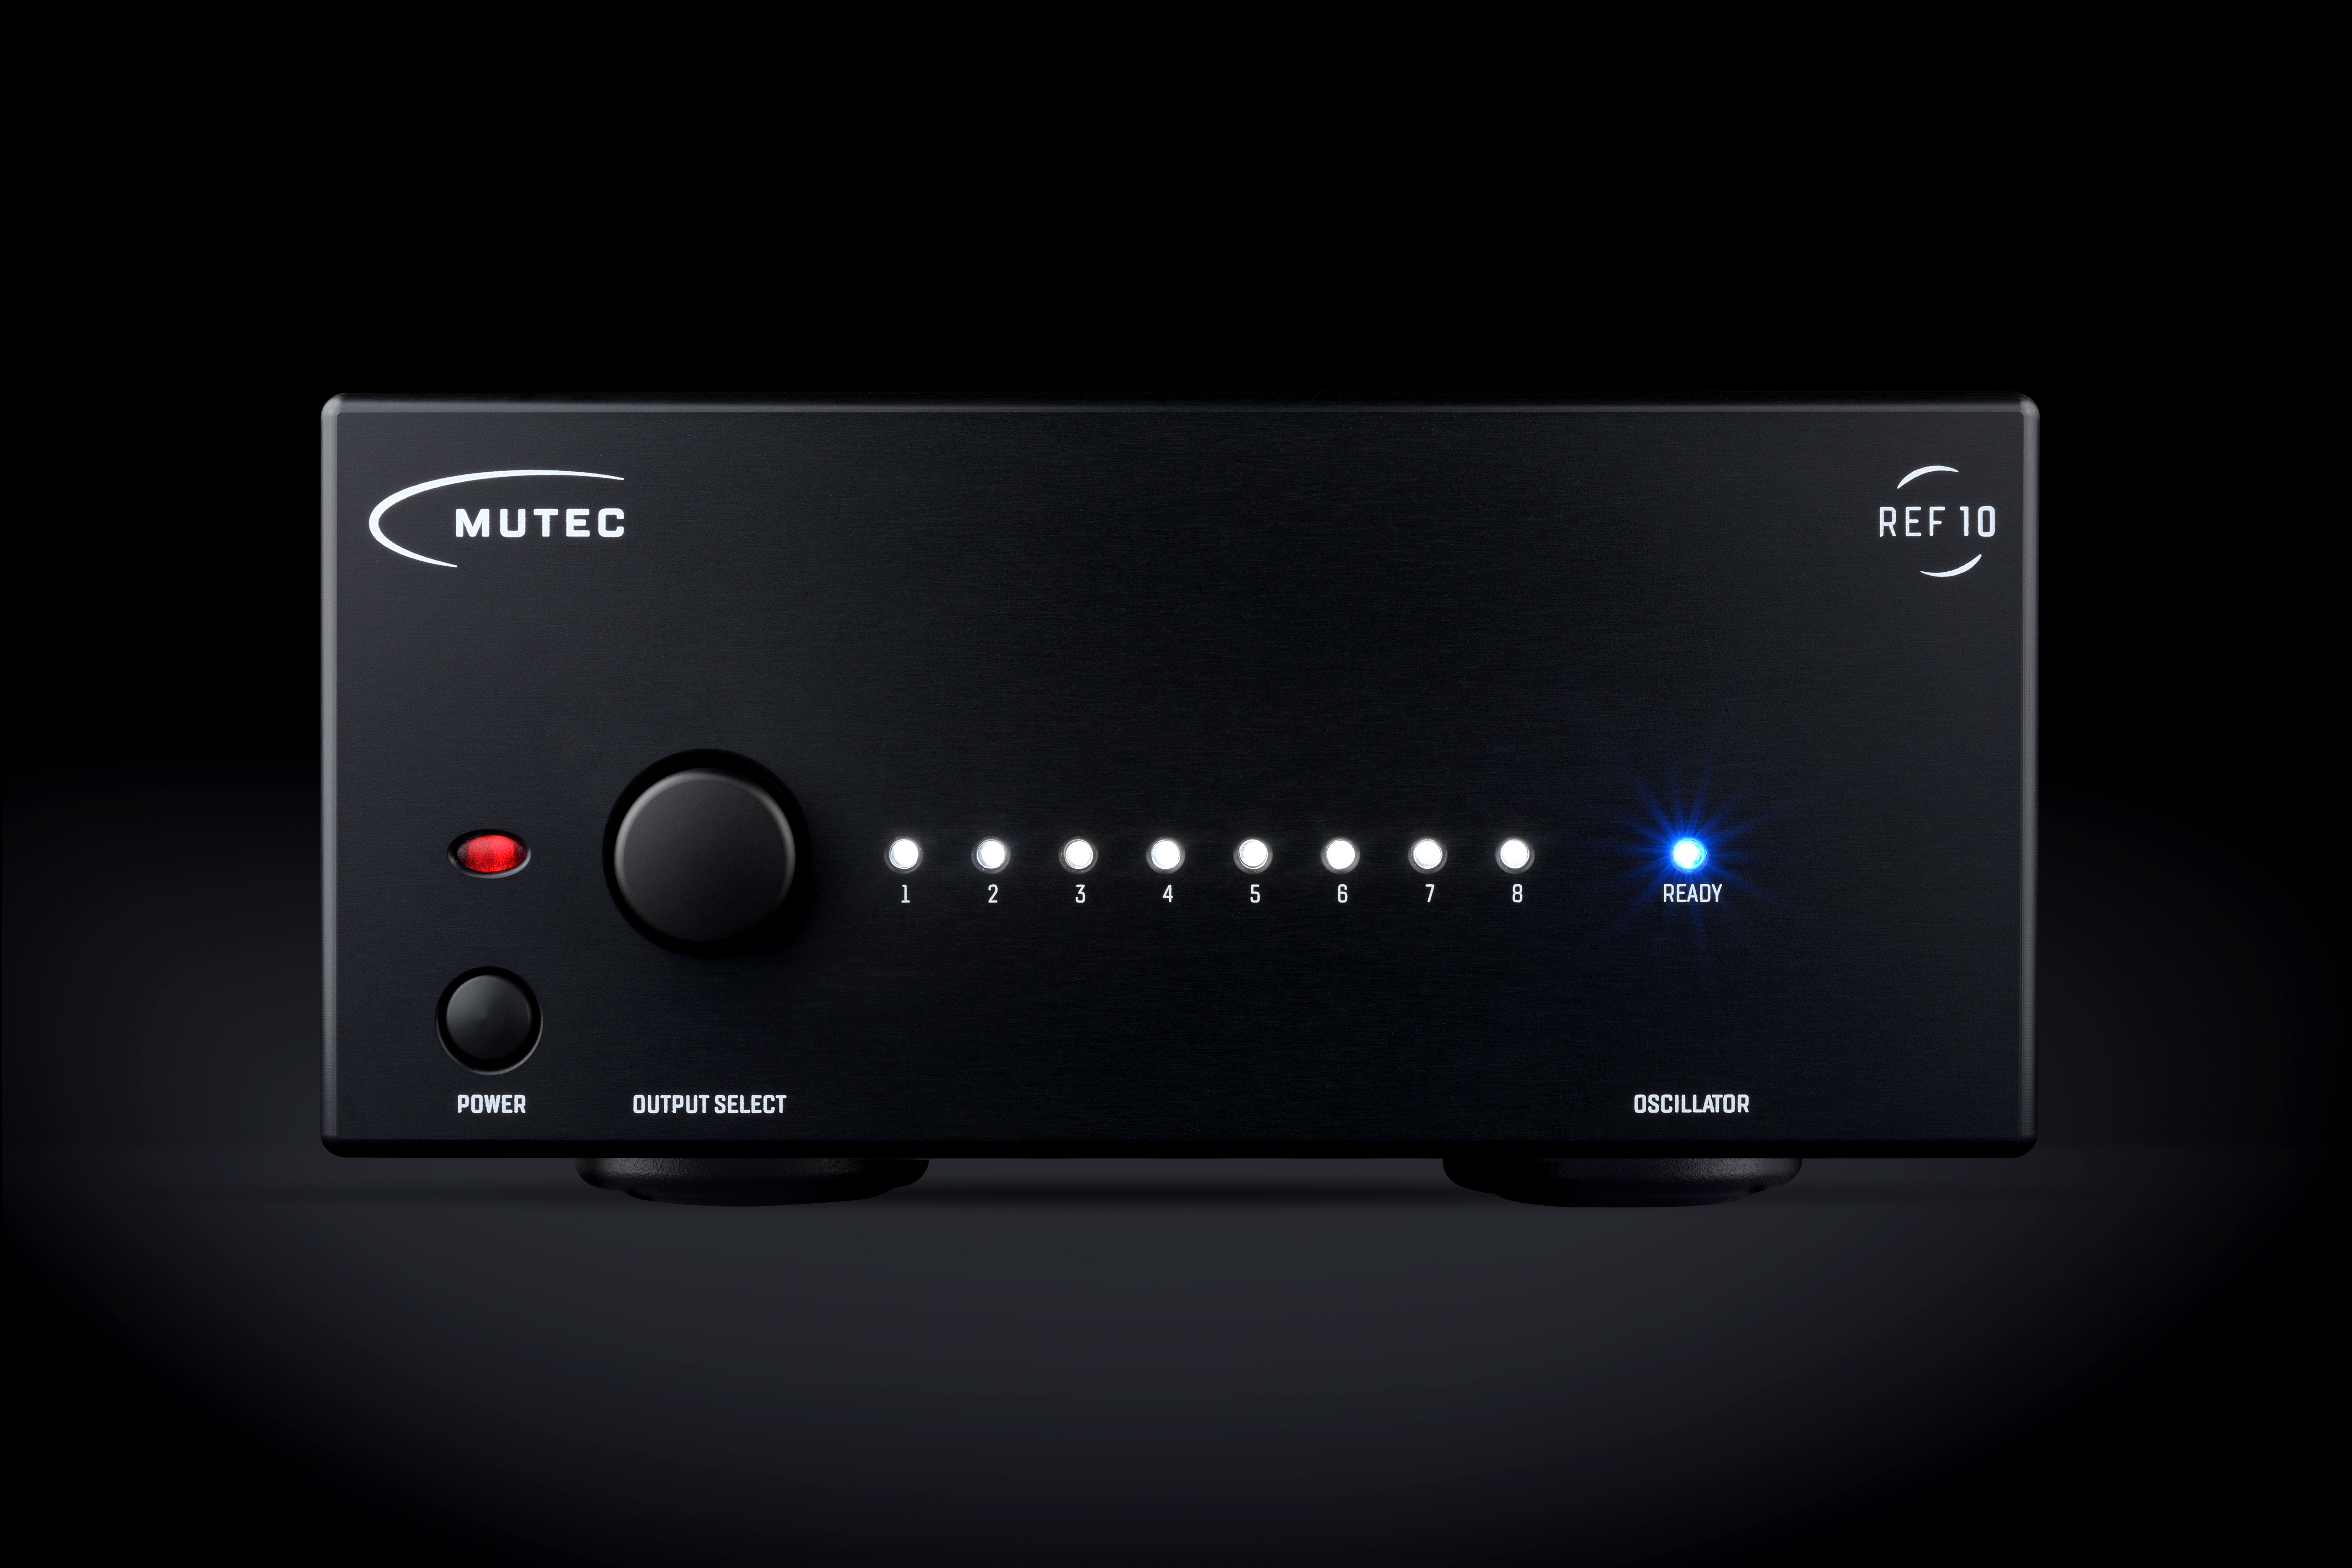 MUTEC - Professional A/V and High-End Equipment - REF10